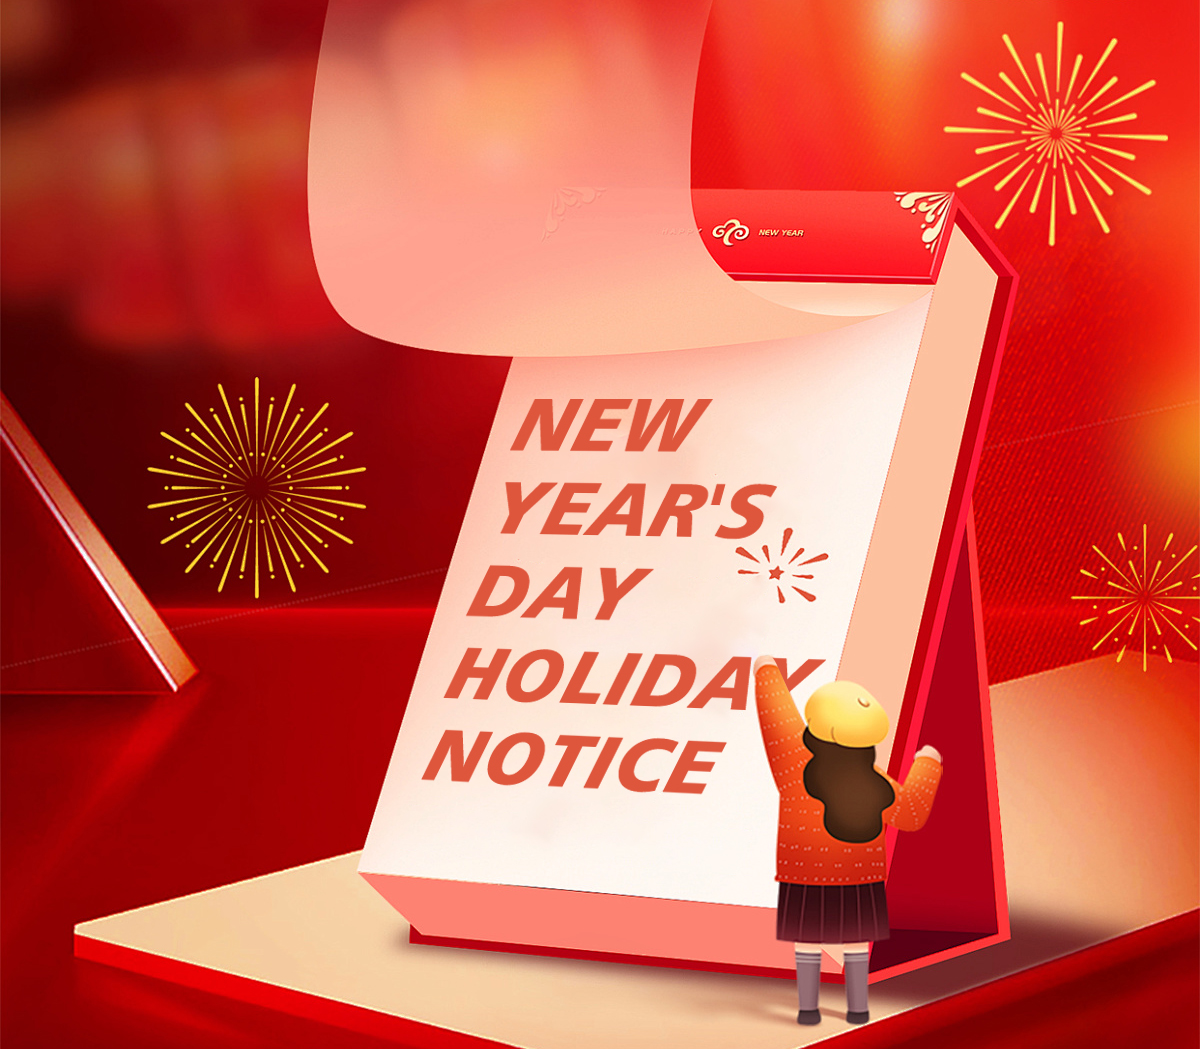 New Year's Day Holiday Notice